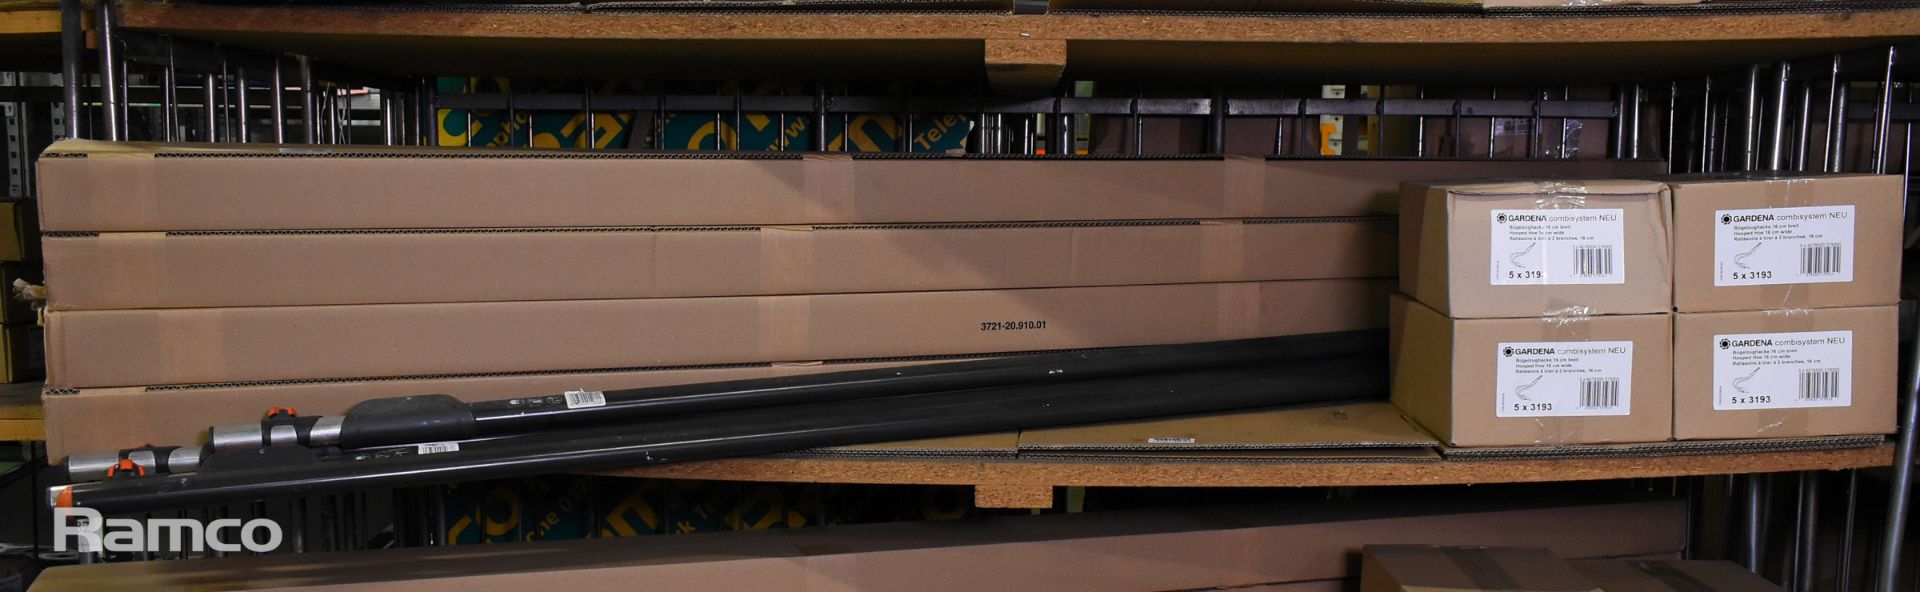 20x Gardena combisystem 210 - 390cm telescopic handles with 3193 hooped draw hoes - Image 2 of 4